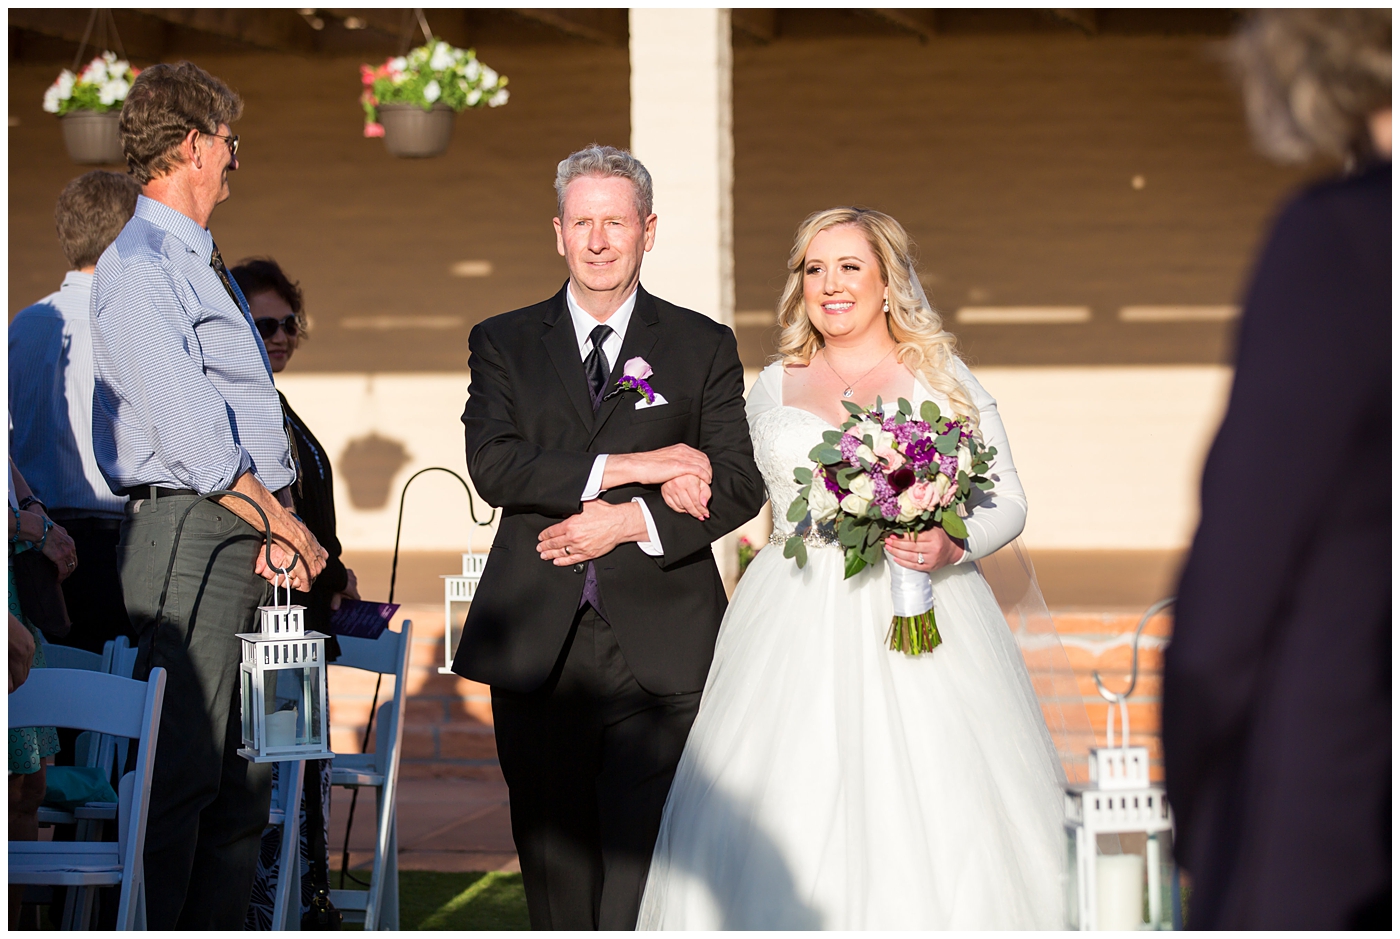 blonde bride in long sleeve wedding dress with purple and white flower bouquet walking down aisle with father at wedding ceremony